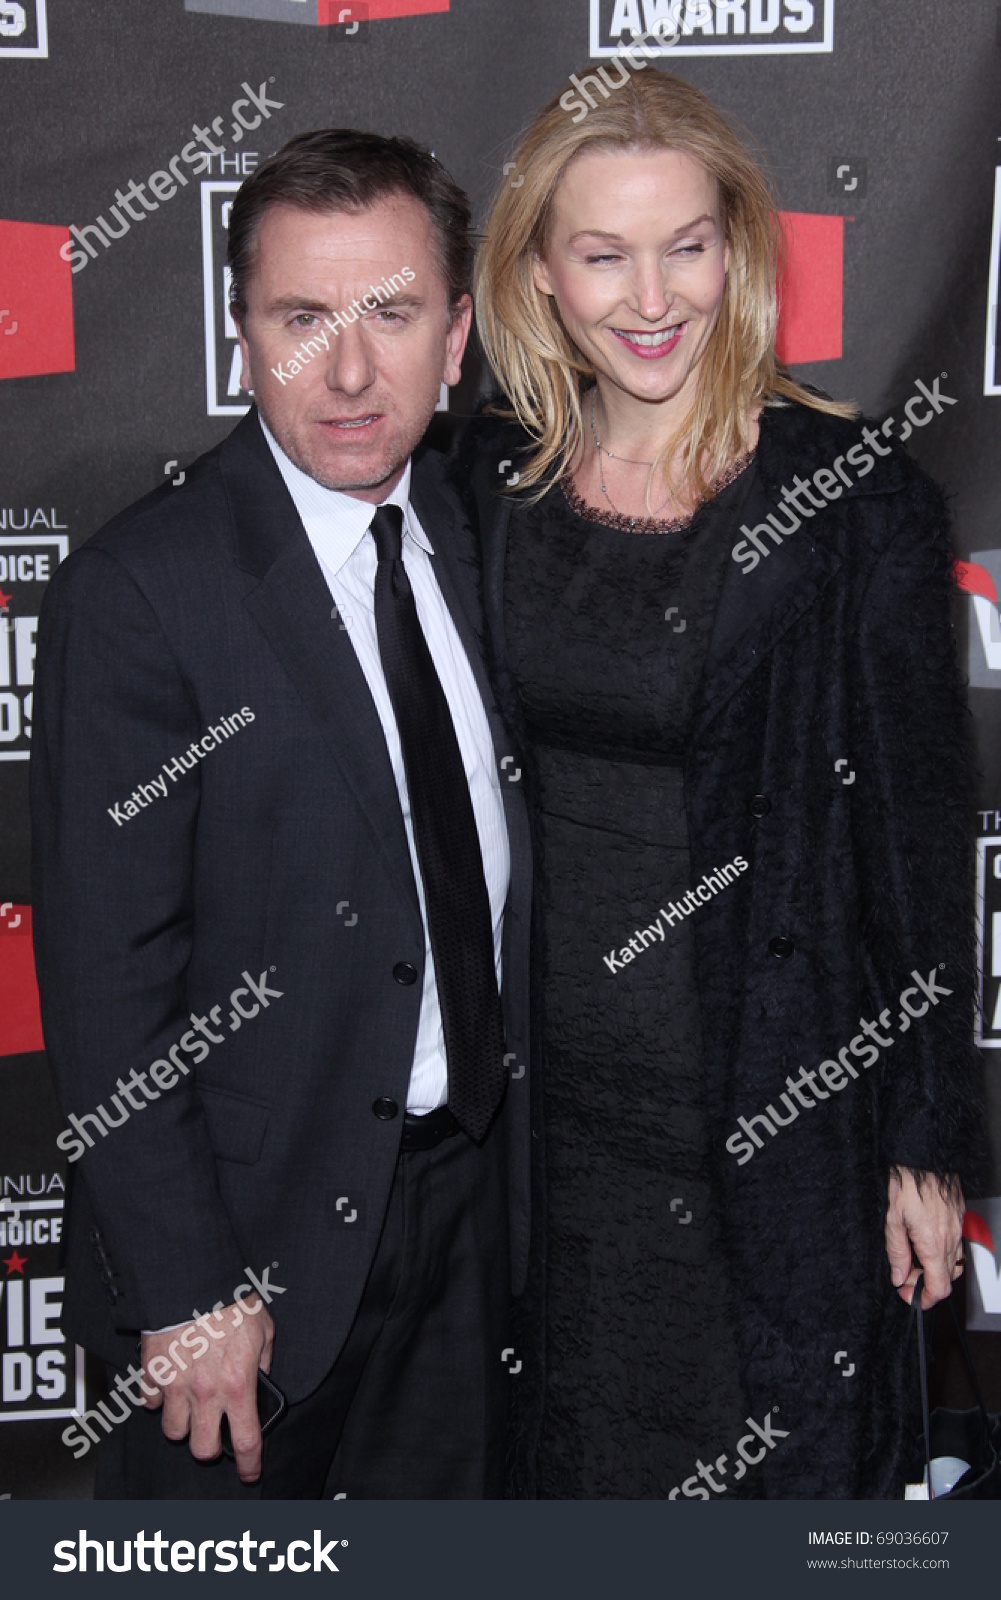 Los Angeles - Jan 14: Tim Roth And Nikki Butler Arrive At The 16th ...